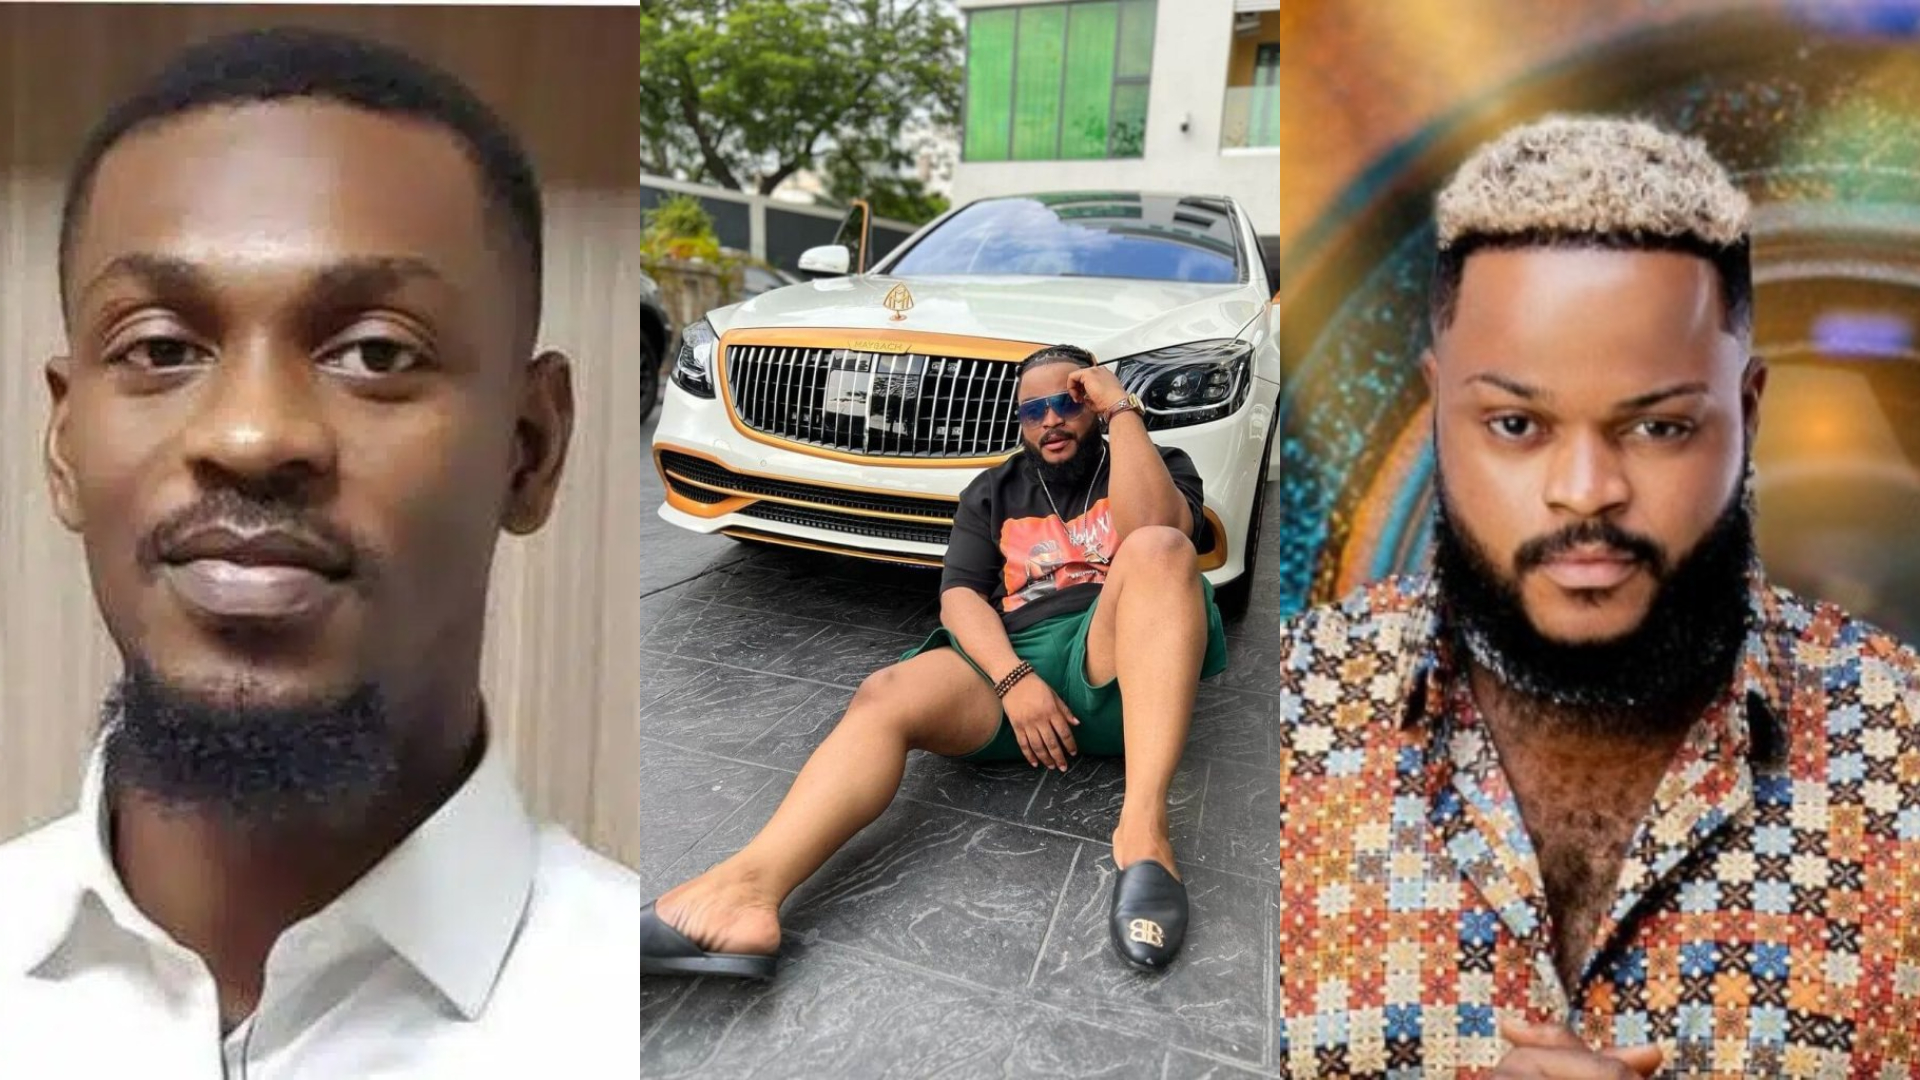 “I asked the price of a car and he did not know” – Adekunle reveals Whitemoney’s alleged strategy [Video]